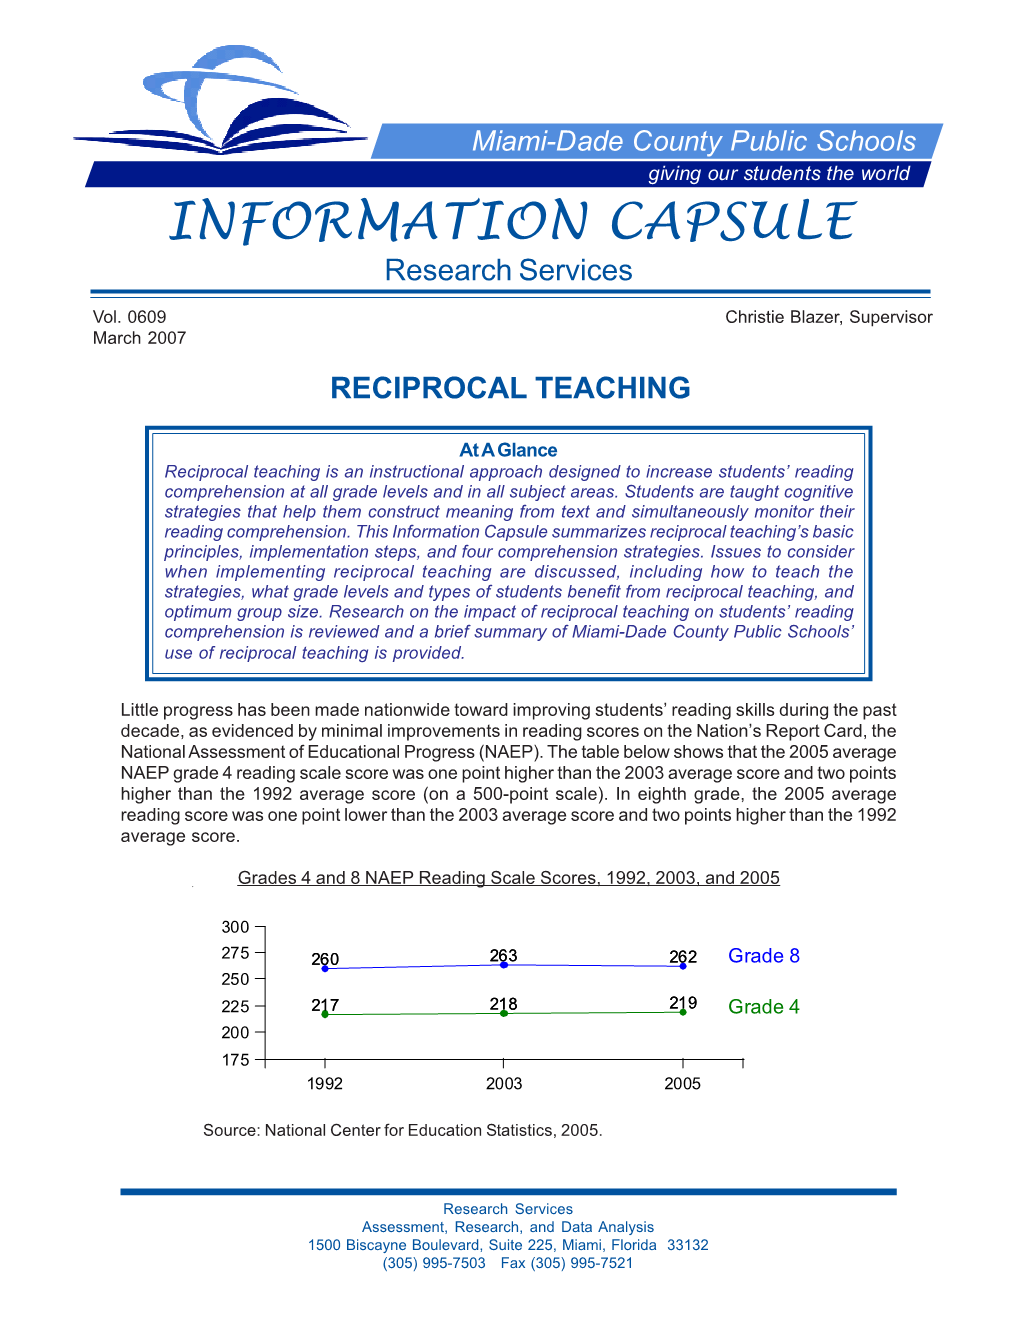 INFORMATION CAPSULE Research Services